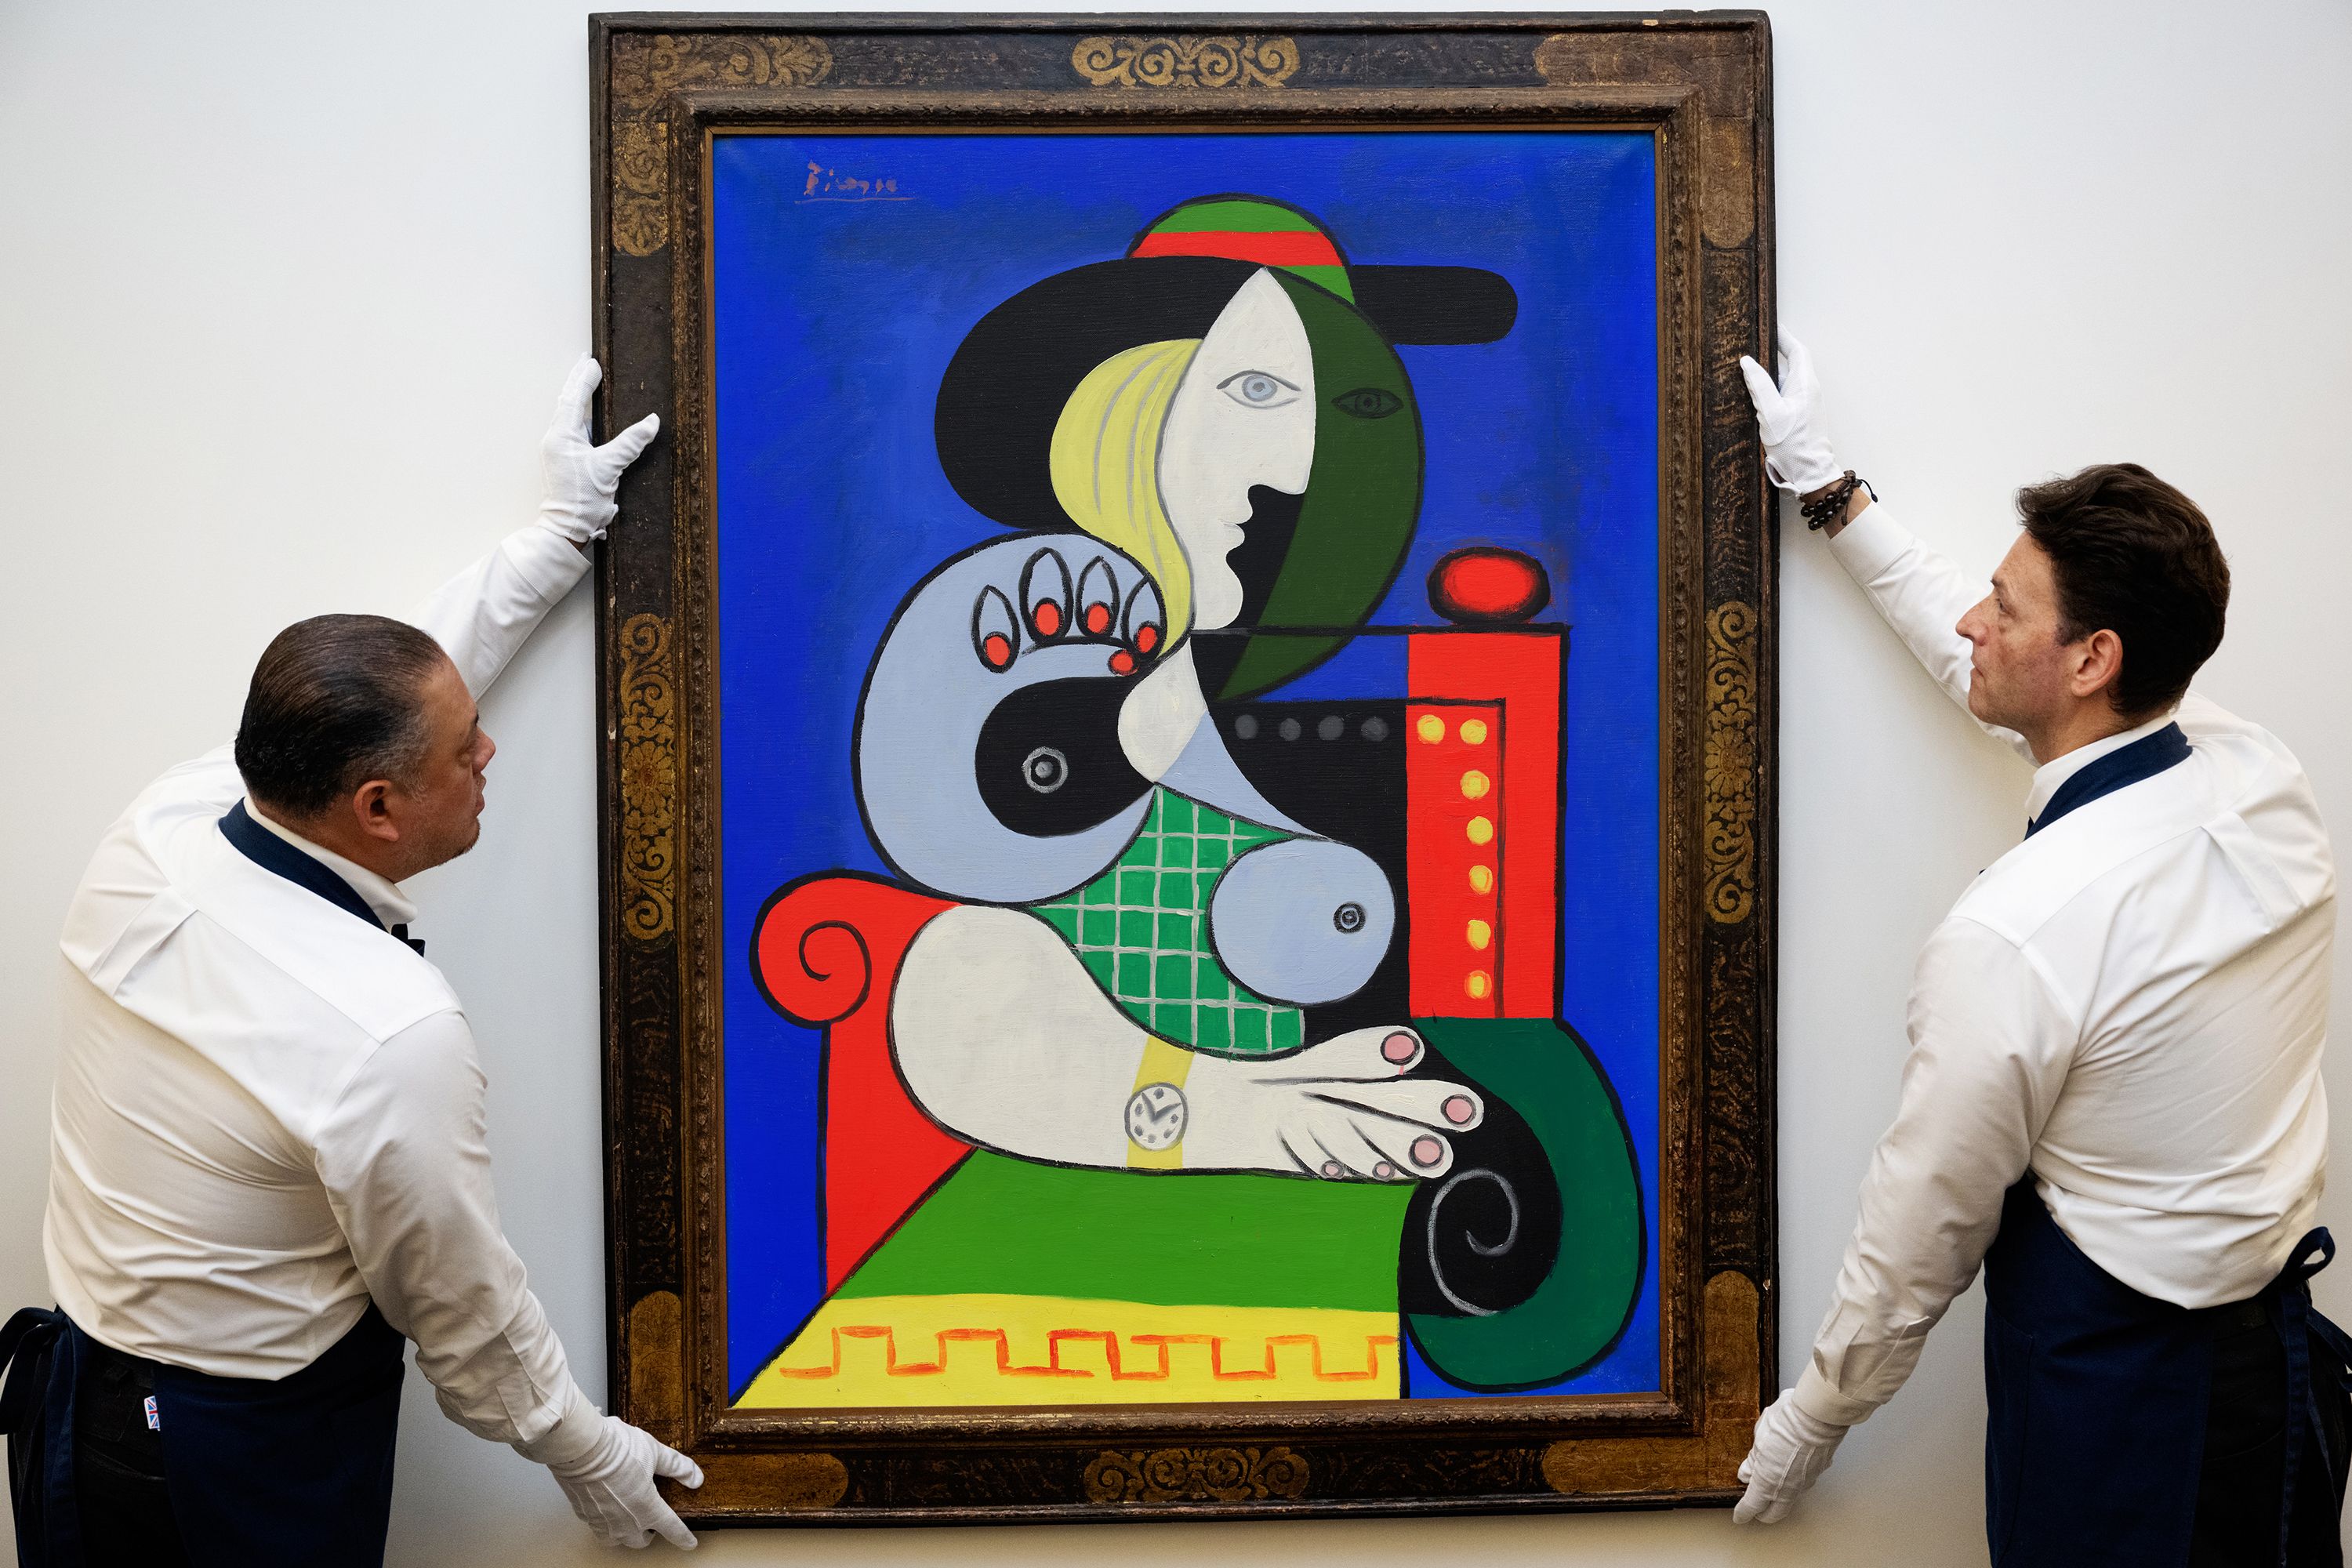 Picasso masterpiece depicting his young mistress sells for $139